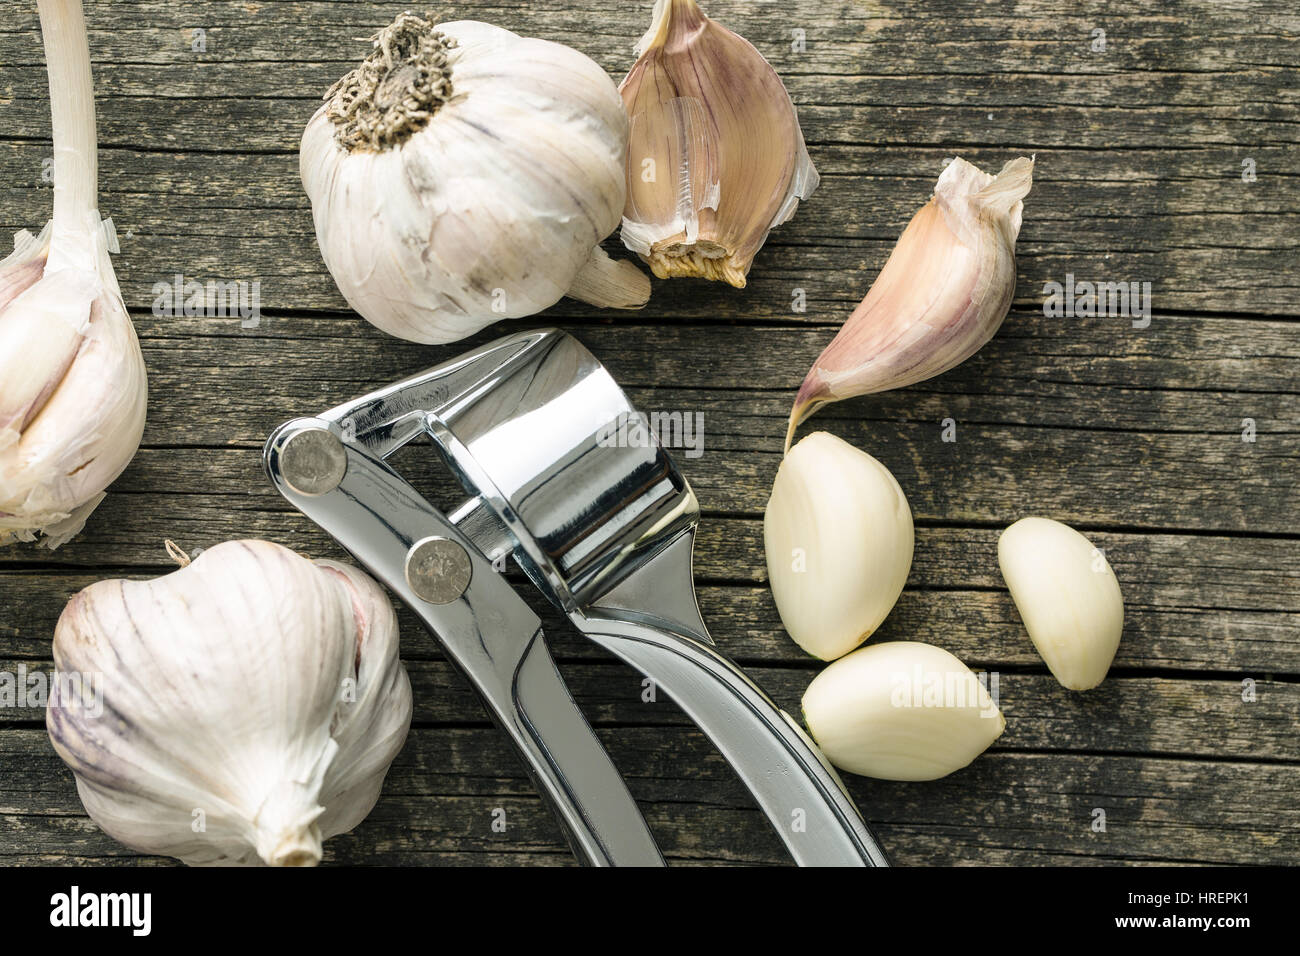 Garlic and garlic press on old wooden table. Top view. Stock Photo